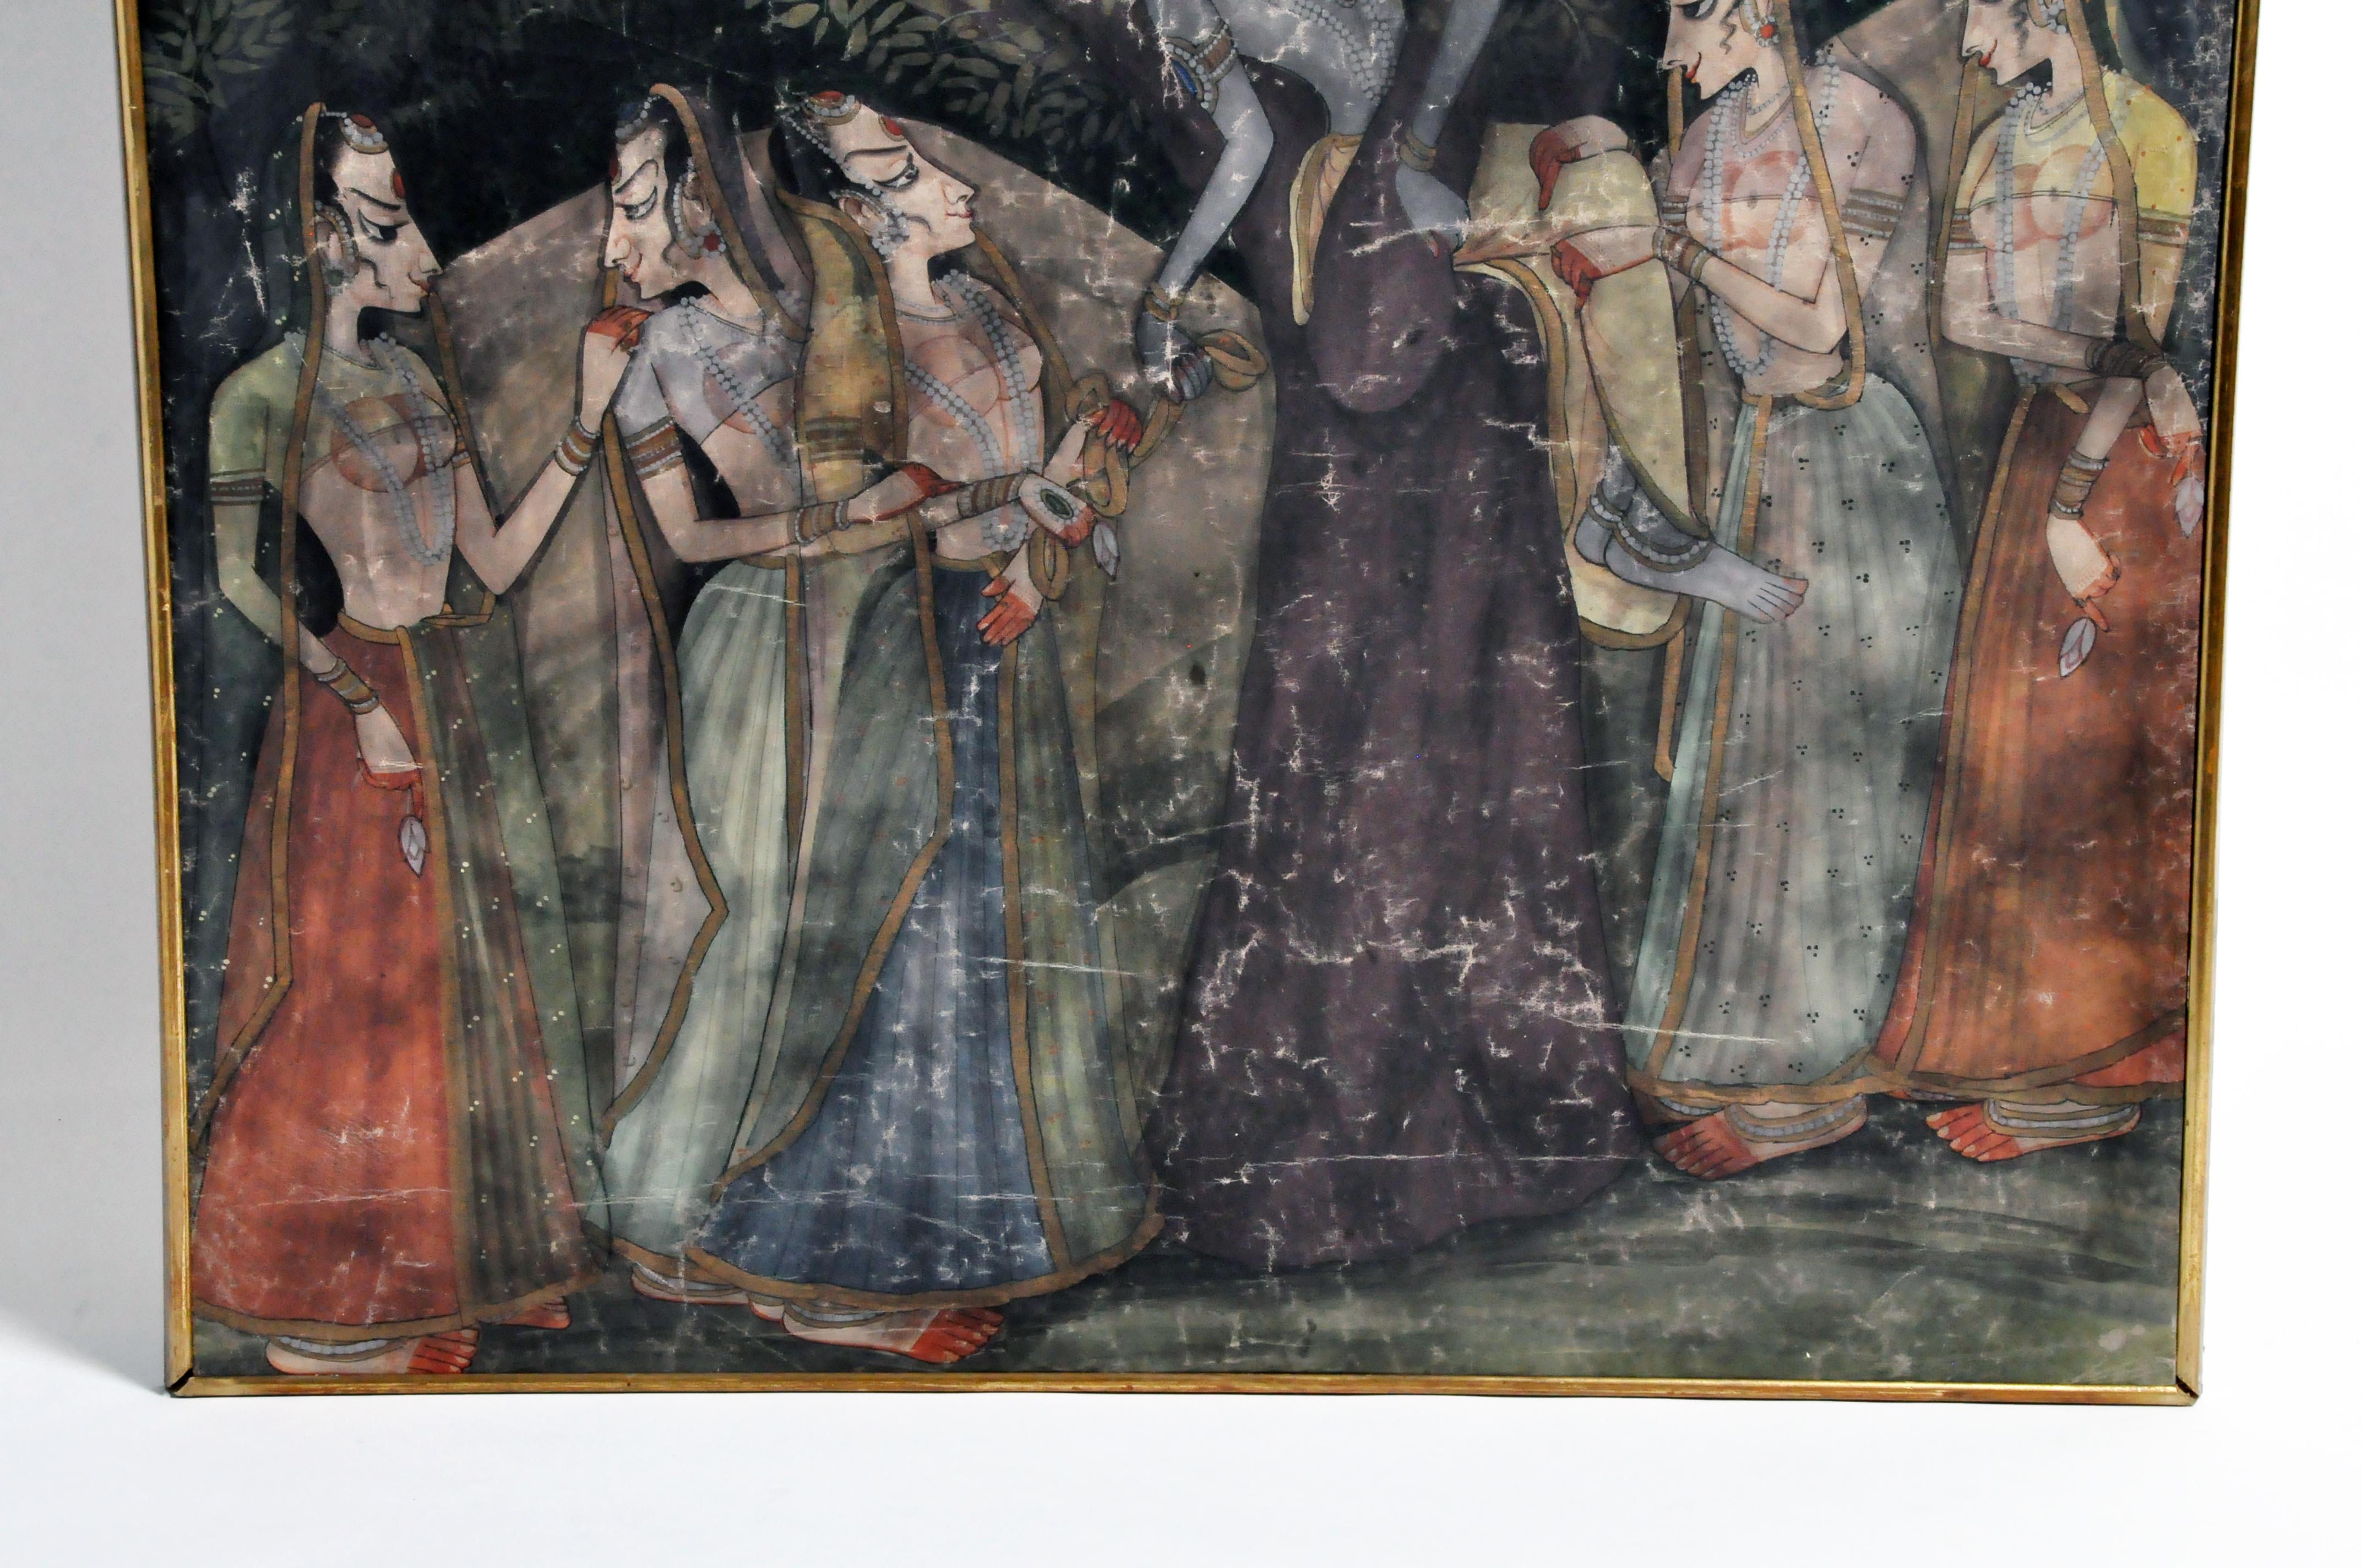 Canvas Large Gouache Painting of Krishna with Female Gopis Dancing